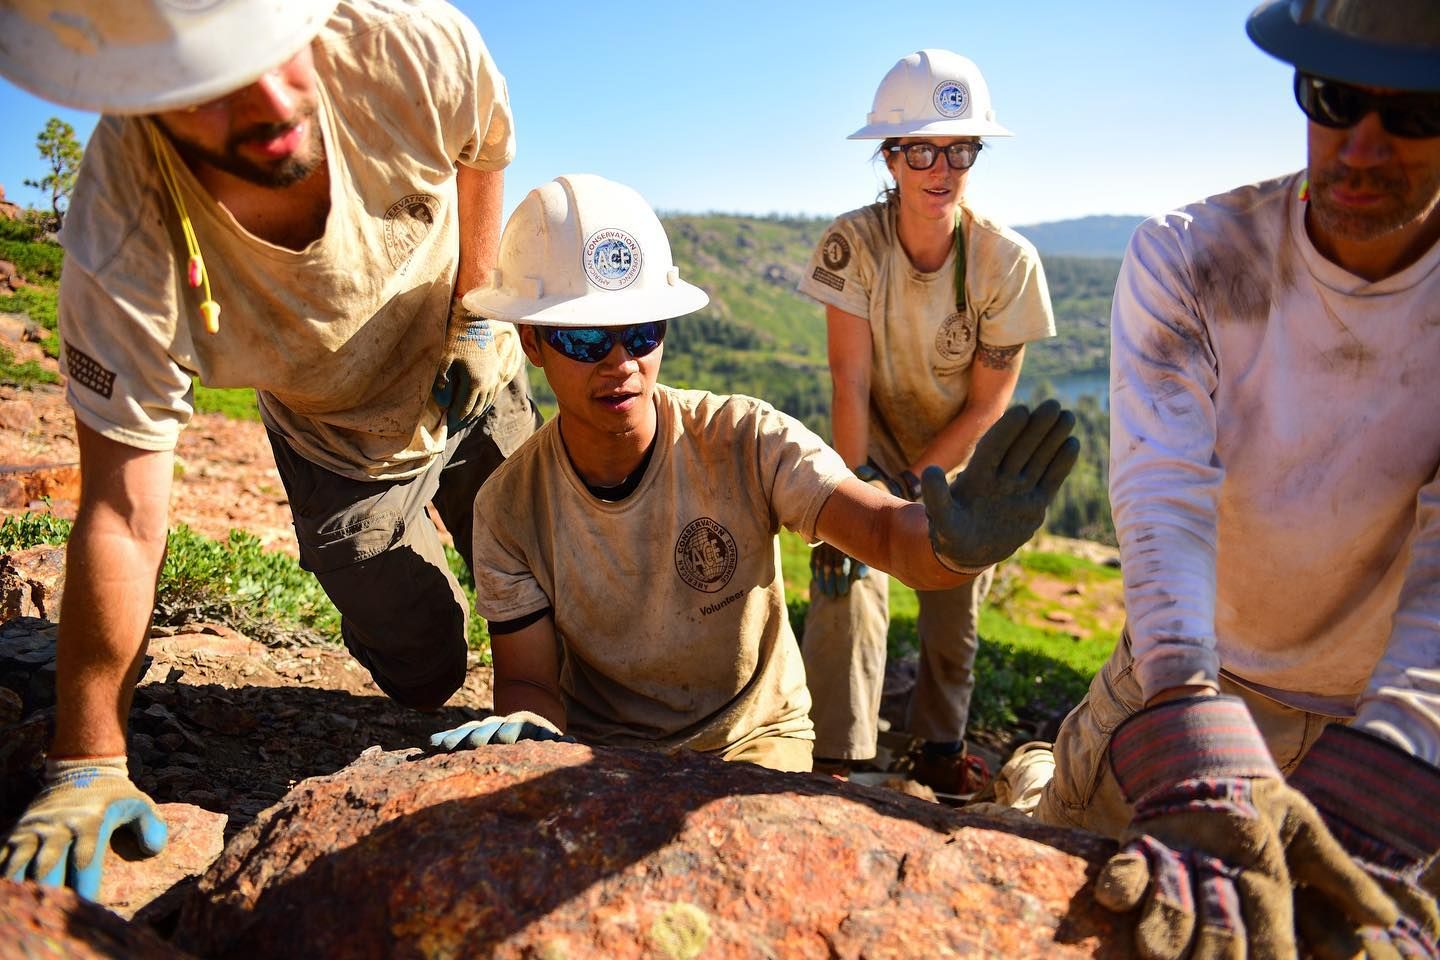 Four Americorps members in hard hats, dirty t-shirts, and work gloves work together outdoors in a rocky landscape.